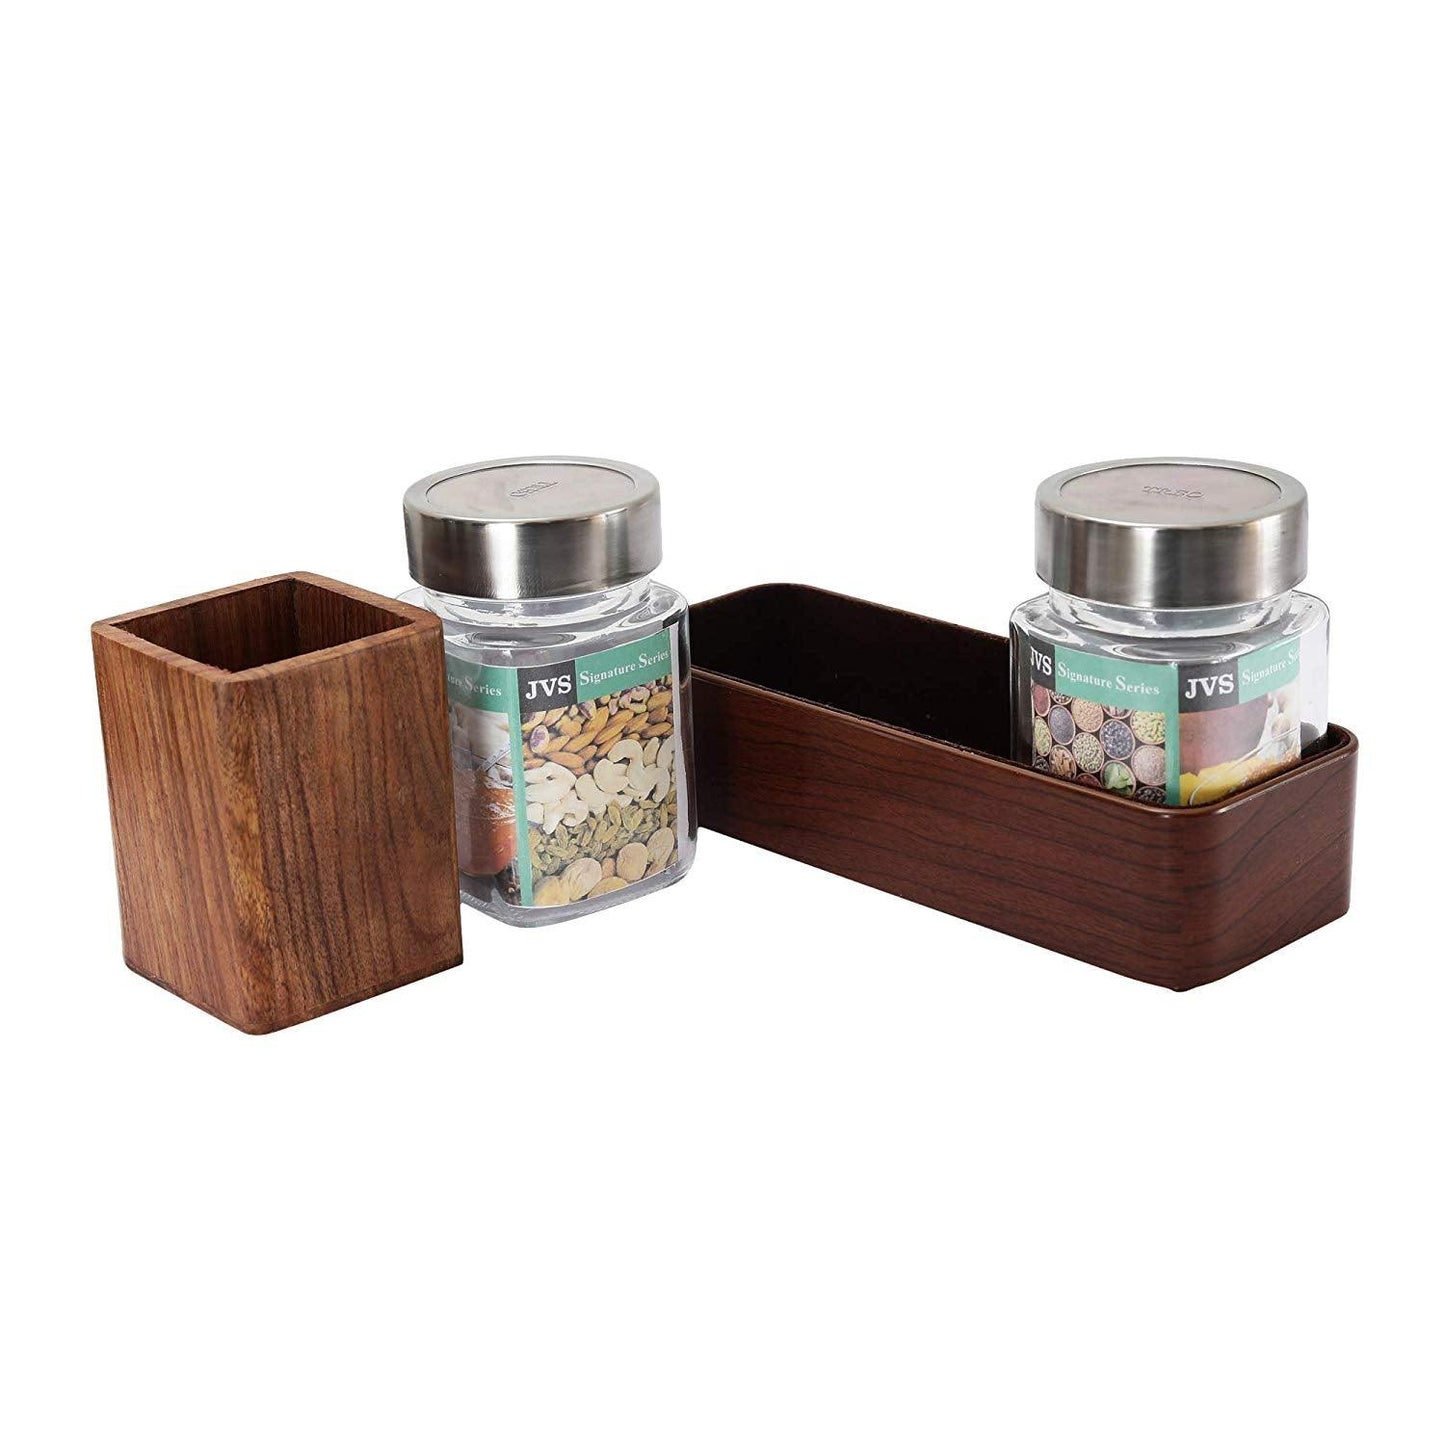 JVS Signature Series 2 Treo Jars (310ml) with 1 Cutlery Holder | Jars & Containers